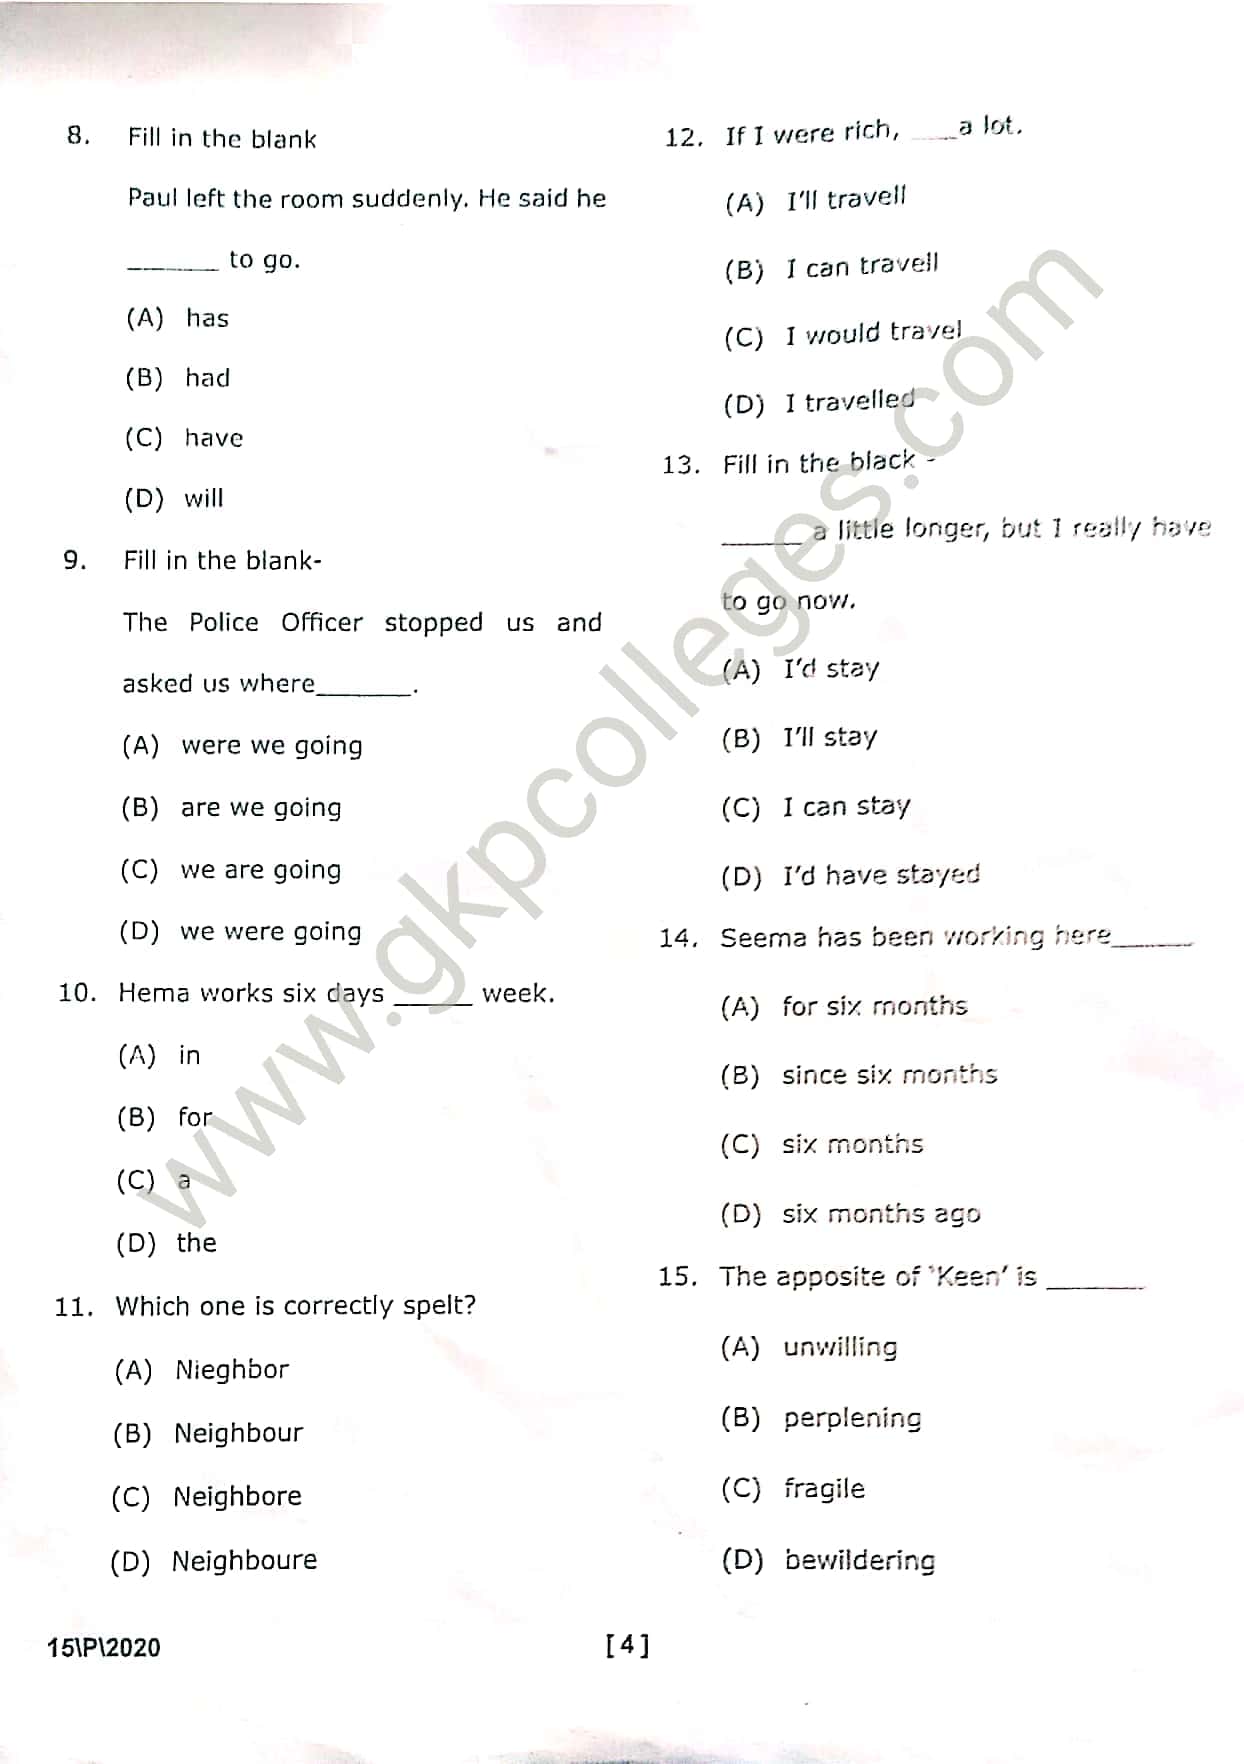 DDU BBA Entrance Exam question paper 2020 with answer key